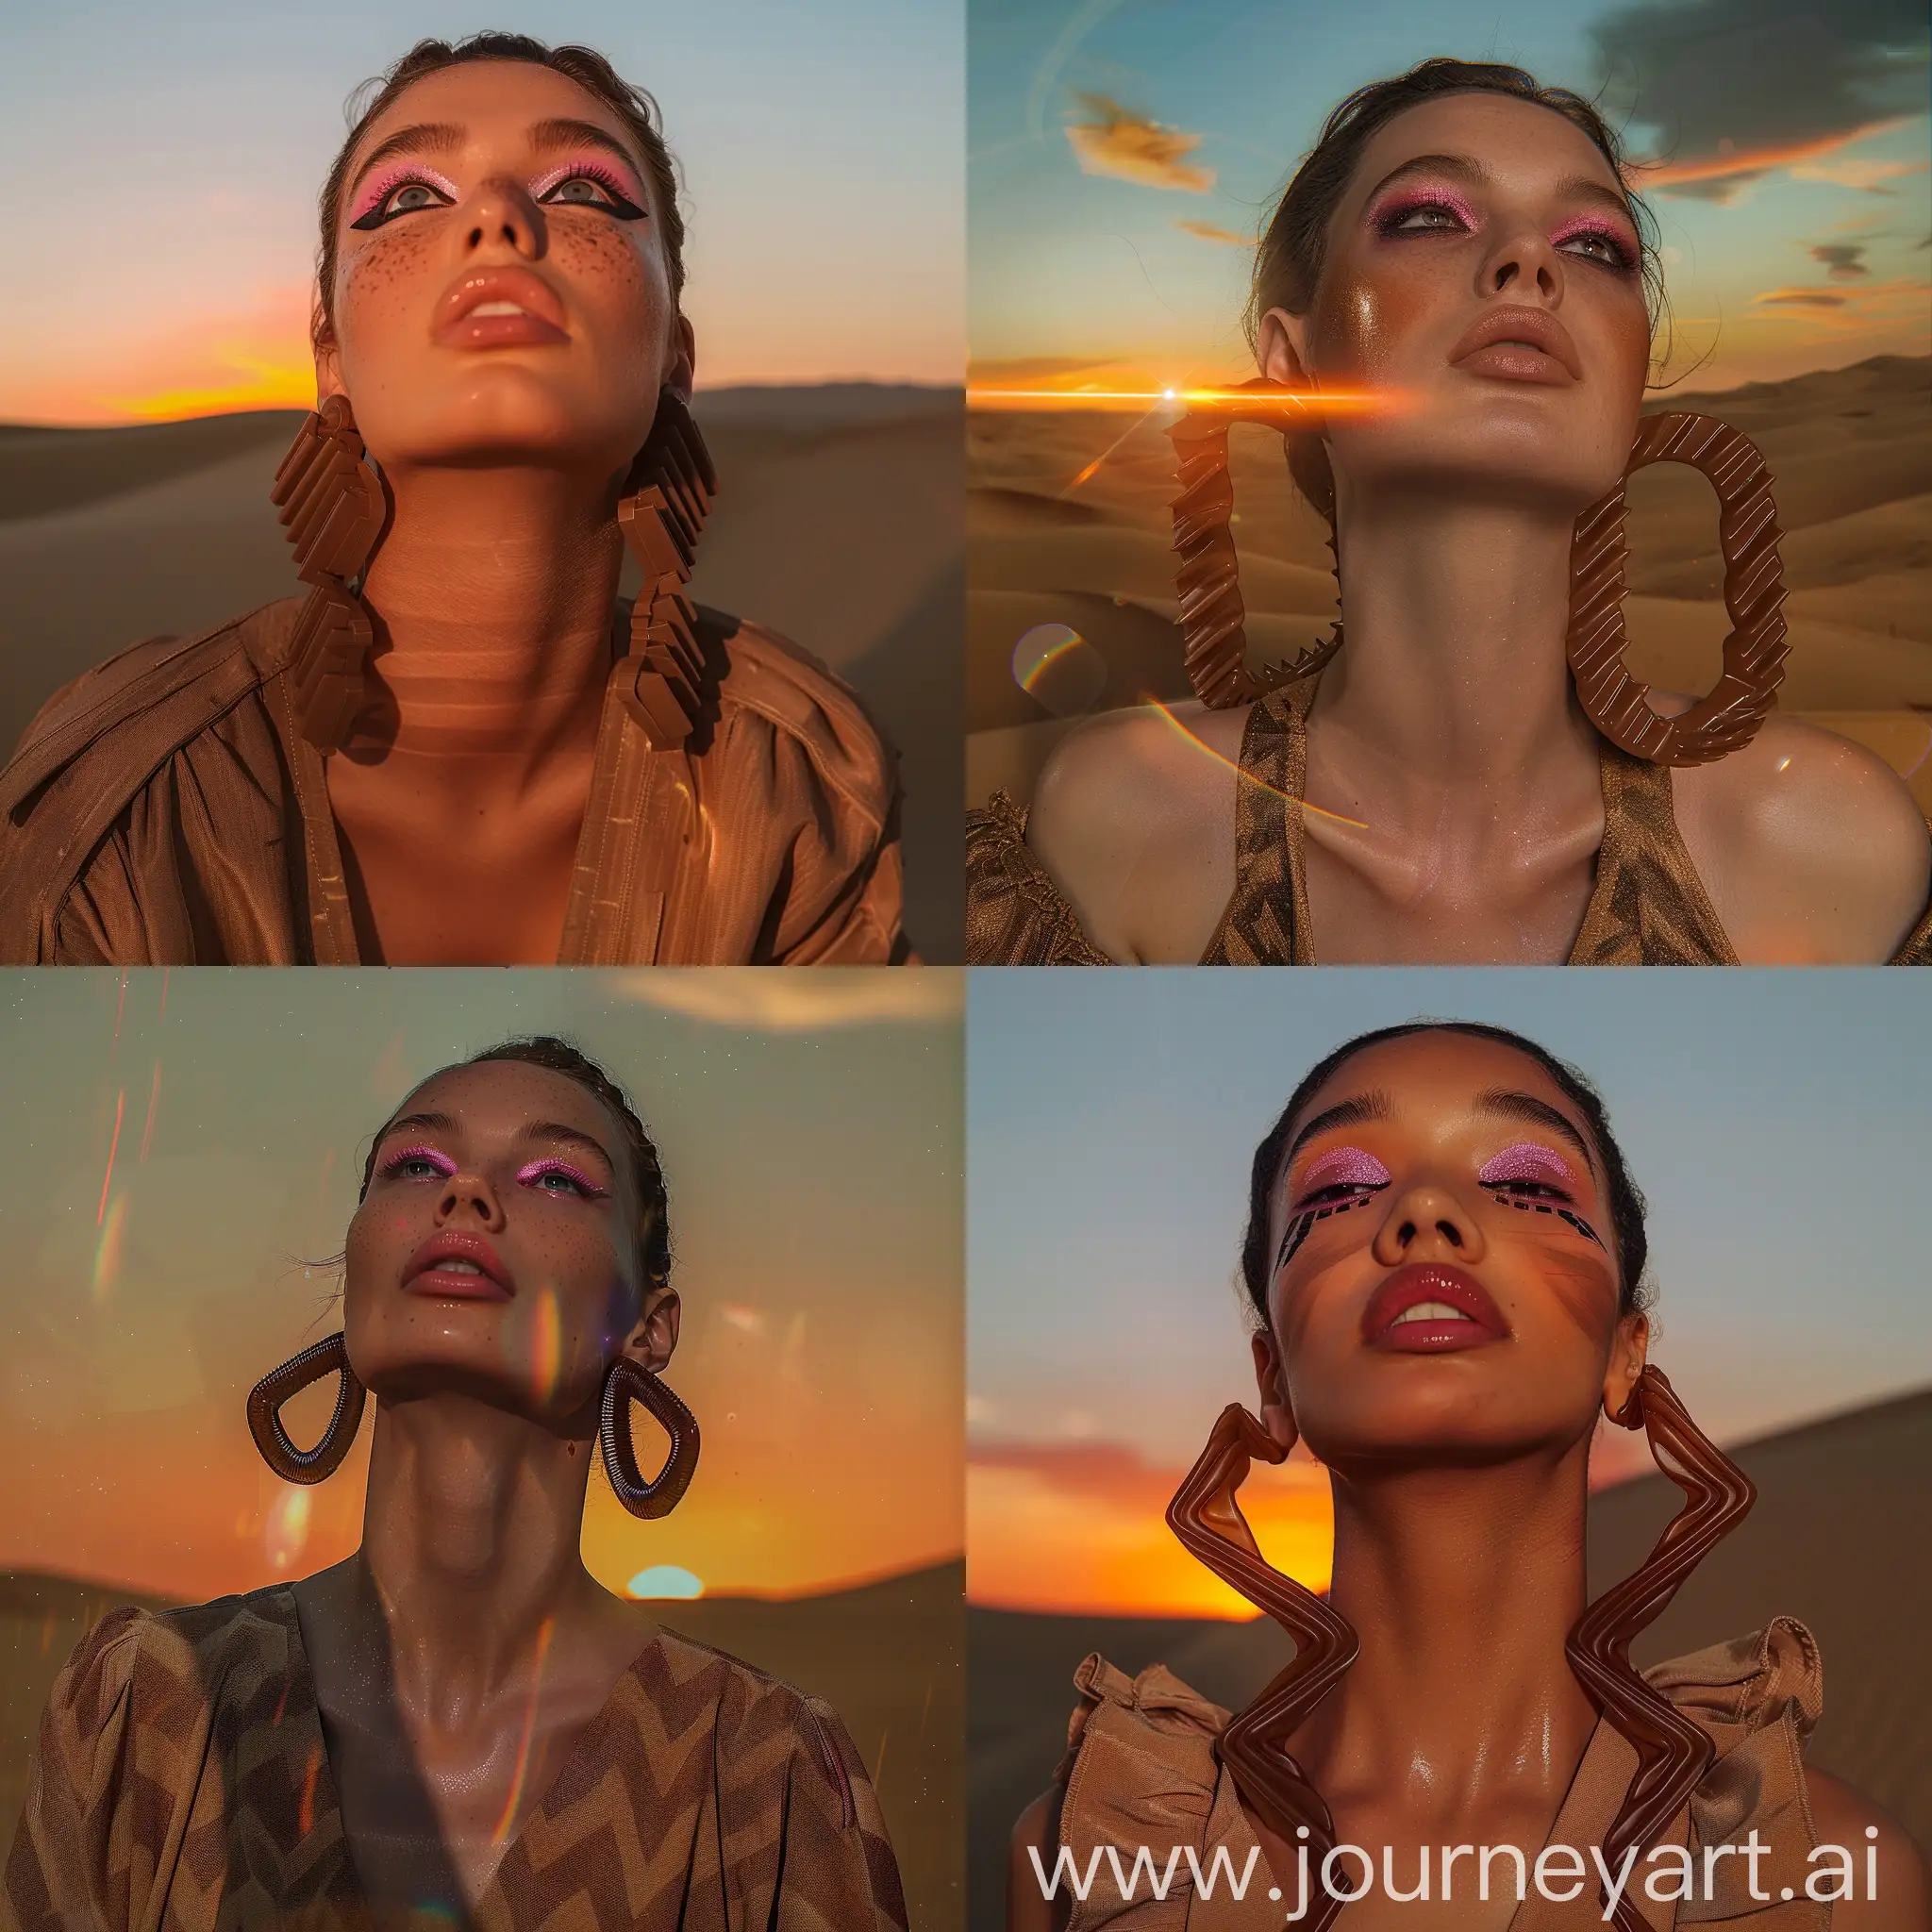 Fashion-Forward-Model-in-Stylish-Zigzag-Earrings-and-Asymmetrical-Jumpsuit-at-Sunset